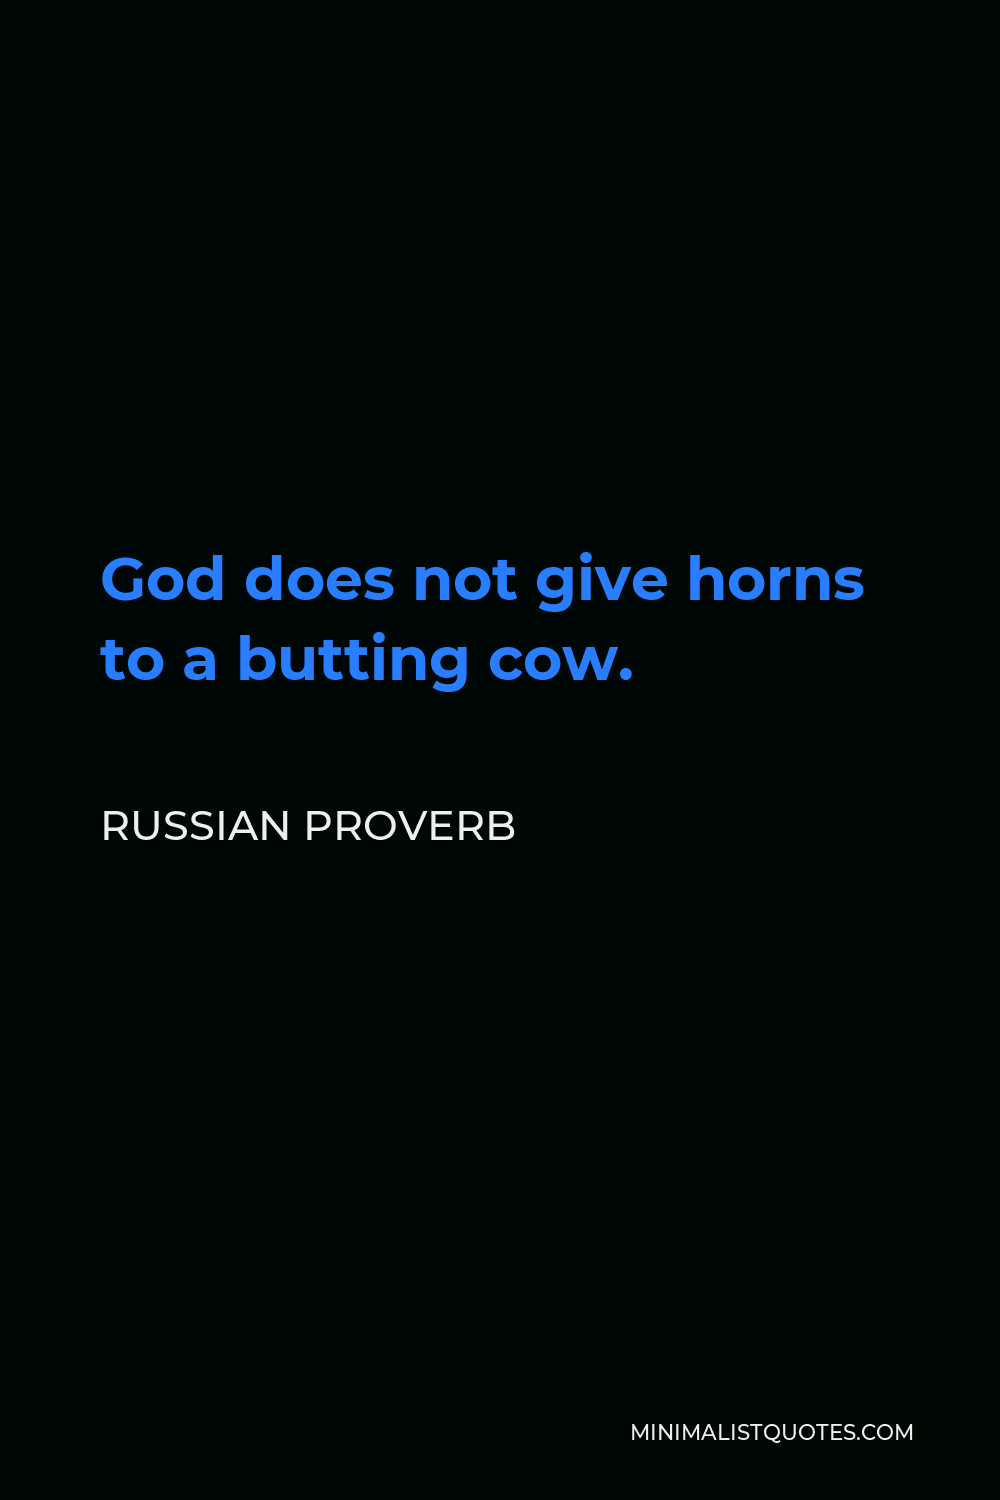 Russian Proverb Quote - God does not give horns to a butting cow.